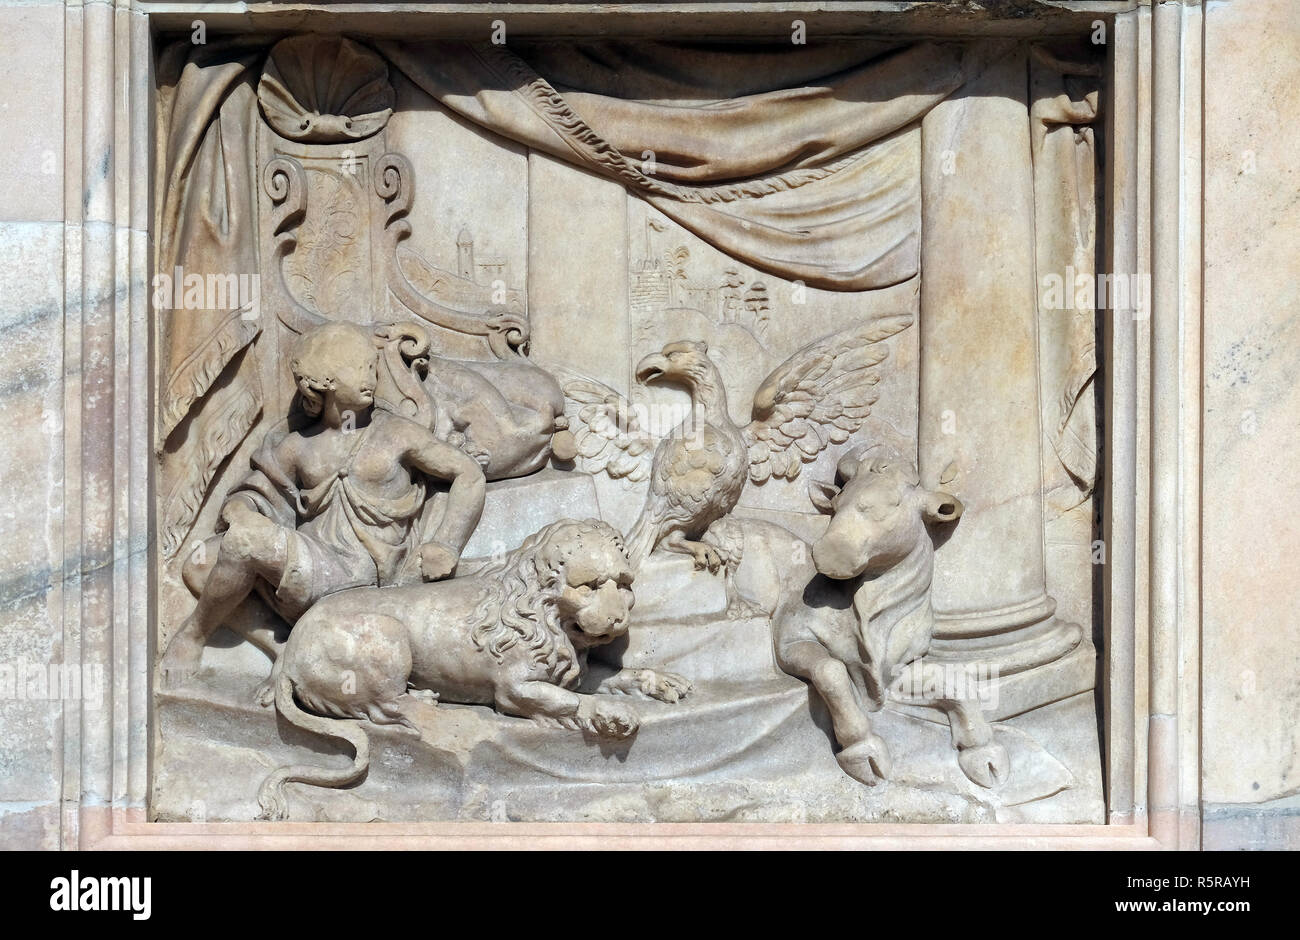 Throne of God and Four Living Creatures, marble relief on the facade of the Milan Cathedral, Duomo di Santa Maria Nascente, Milan, Lombardy, Italy Stock Photo